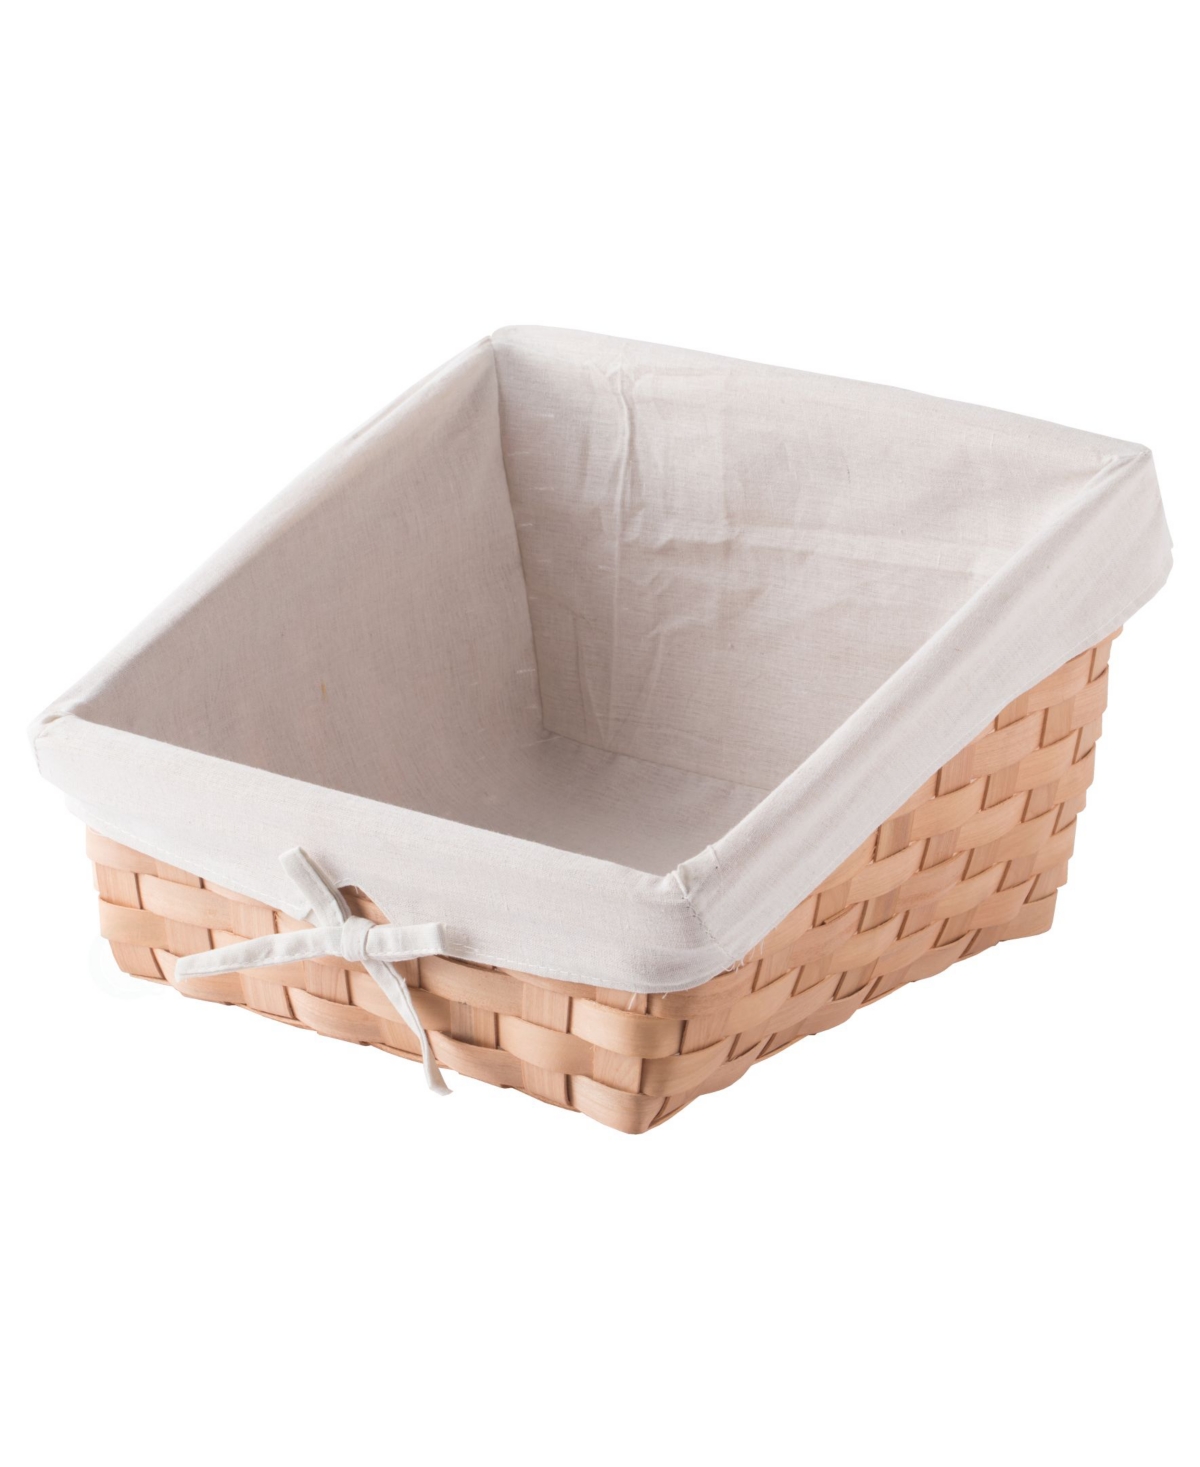 Wooden Angled Display Basket with Fabric Liner - Brown